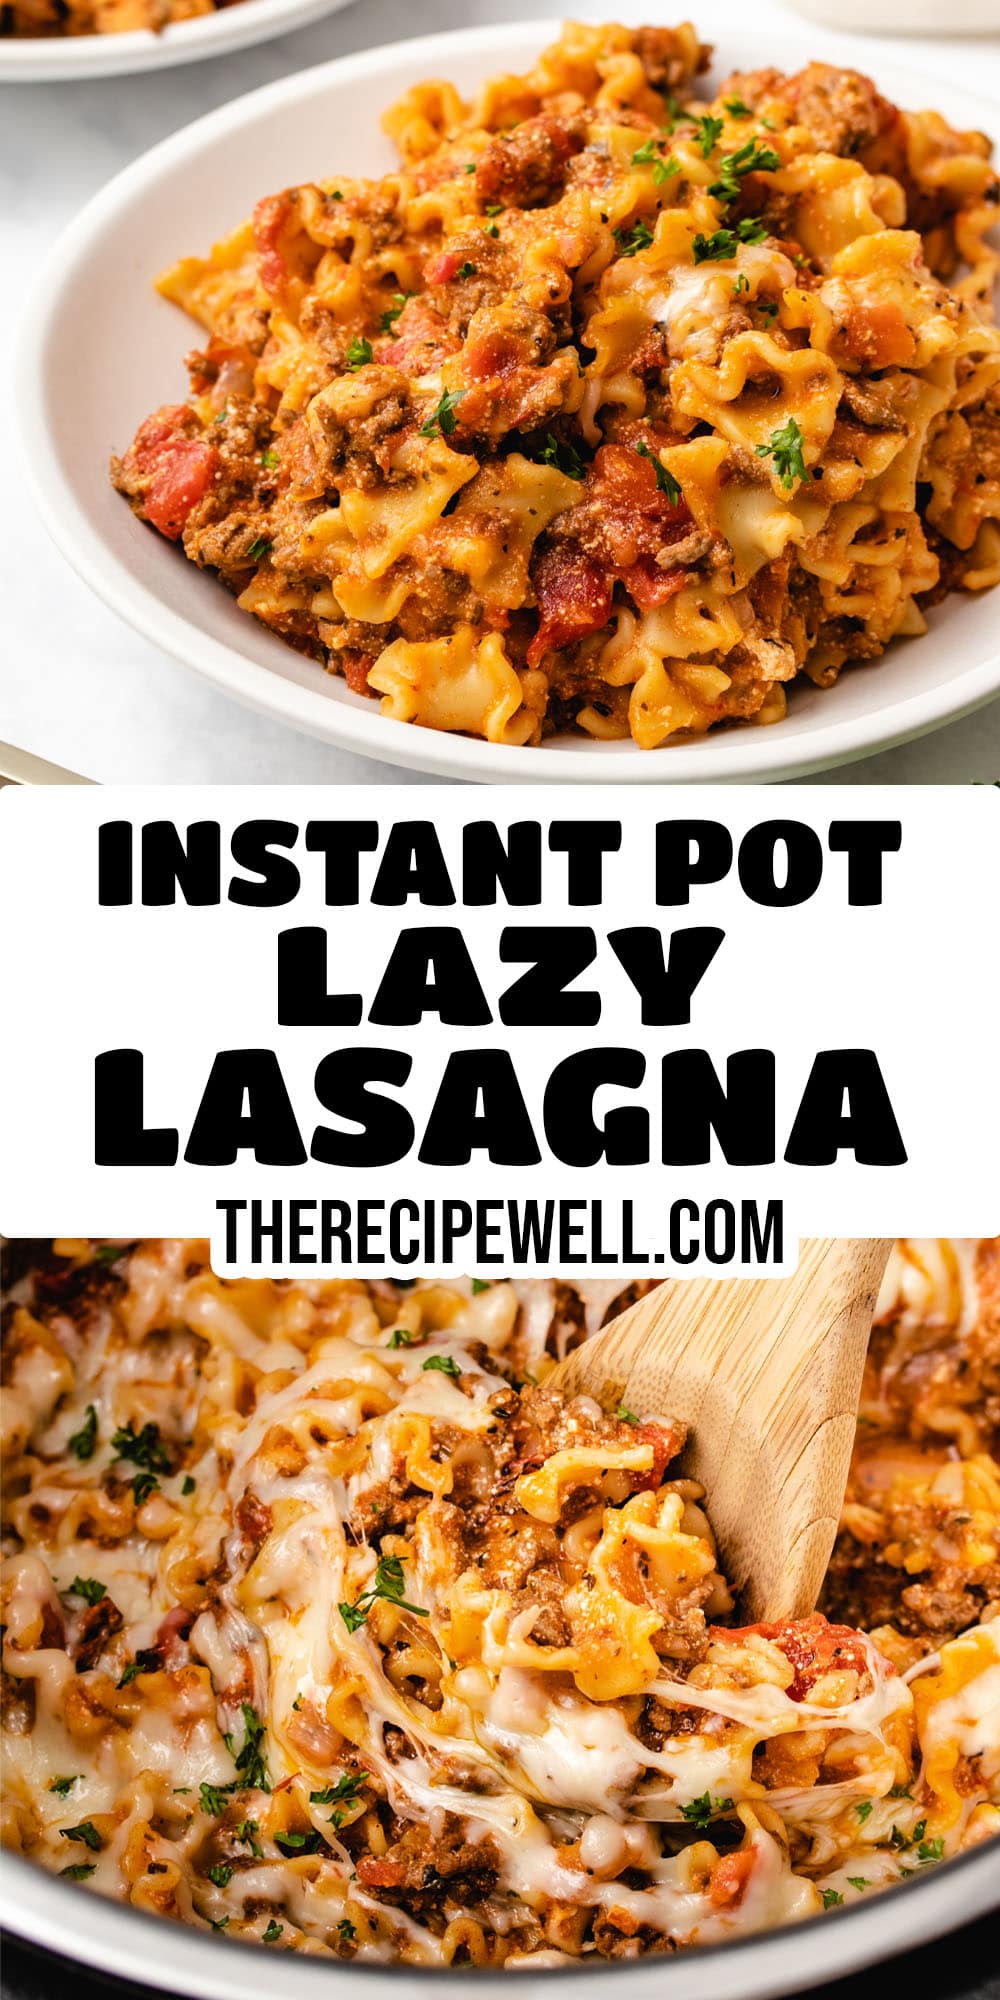 Say hello to the easiest lasagna ever with this Instant Pot Lazy Lasagna! Made with layers of meat, noodles, sauce, and two types of cheese, it's a quick and easy one-pot meal! via @therecipewell